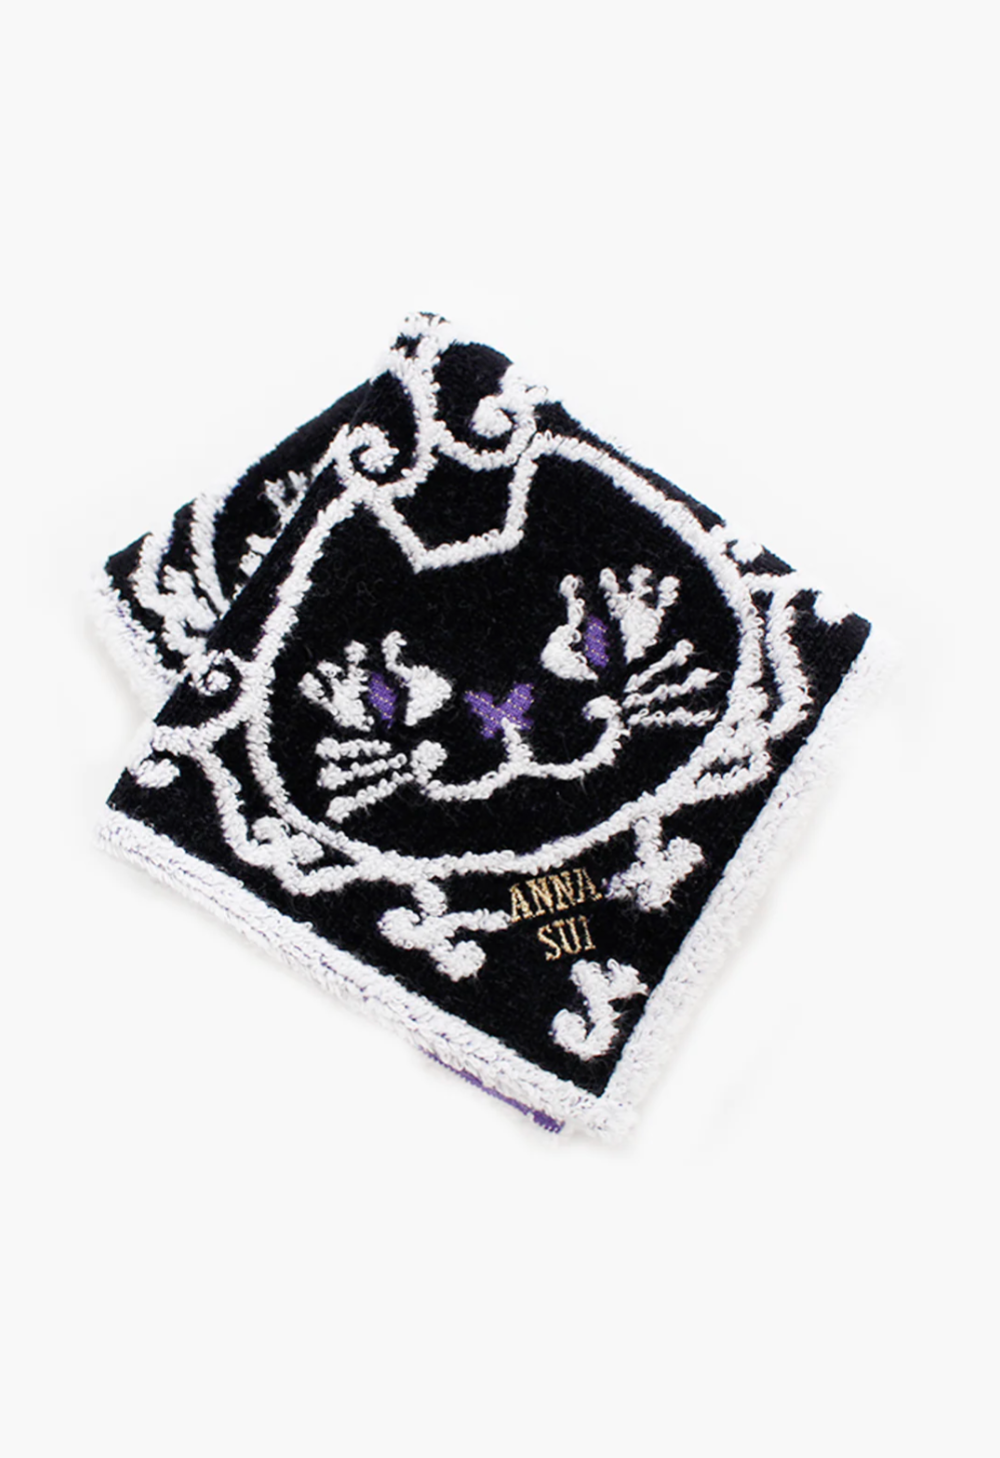 Cat Pattern Washcloth in black, detail of white/purple cat pattern, Anna Sui's label in the corner 